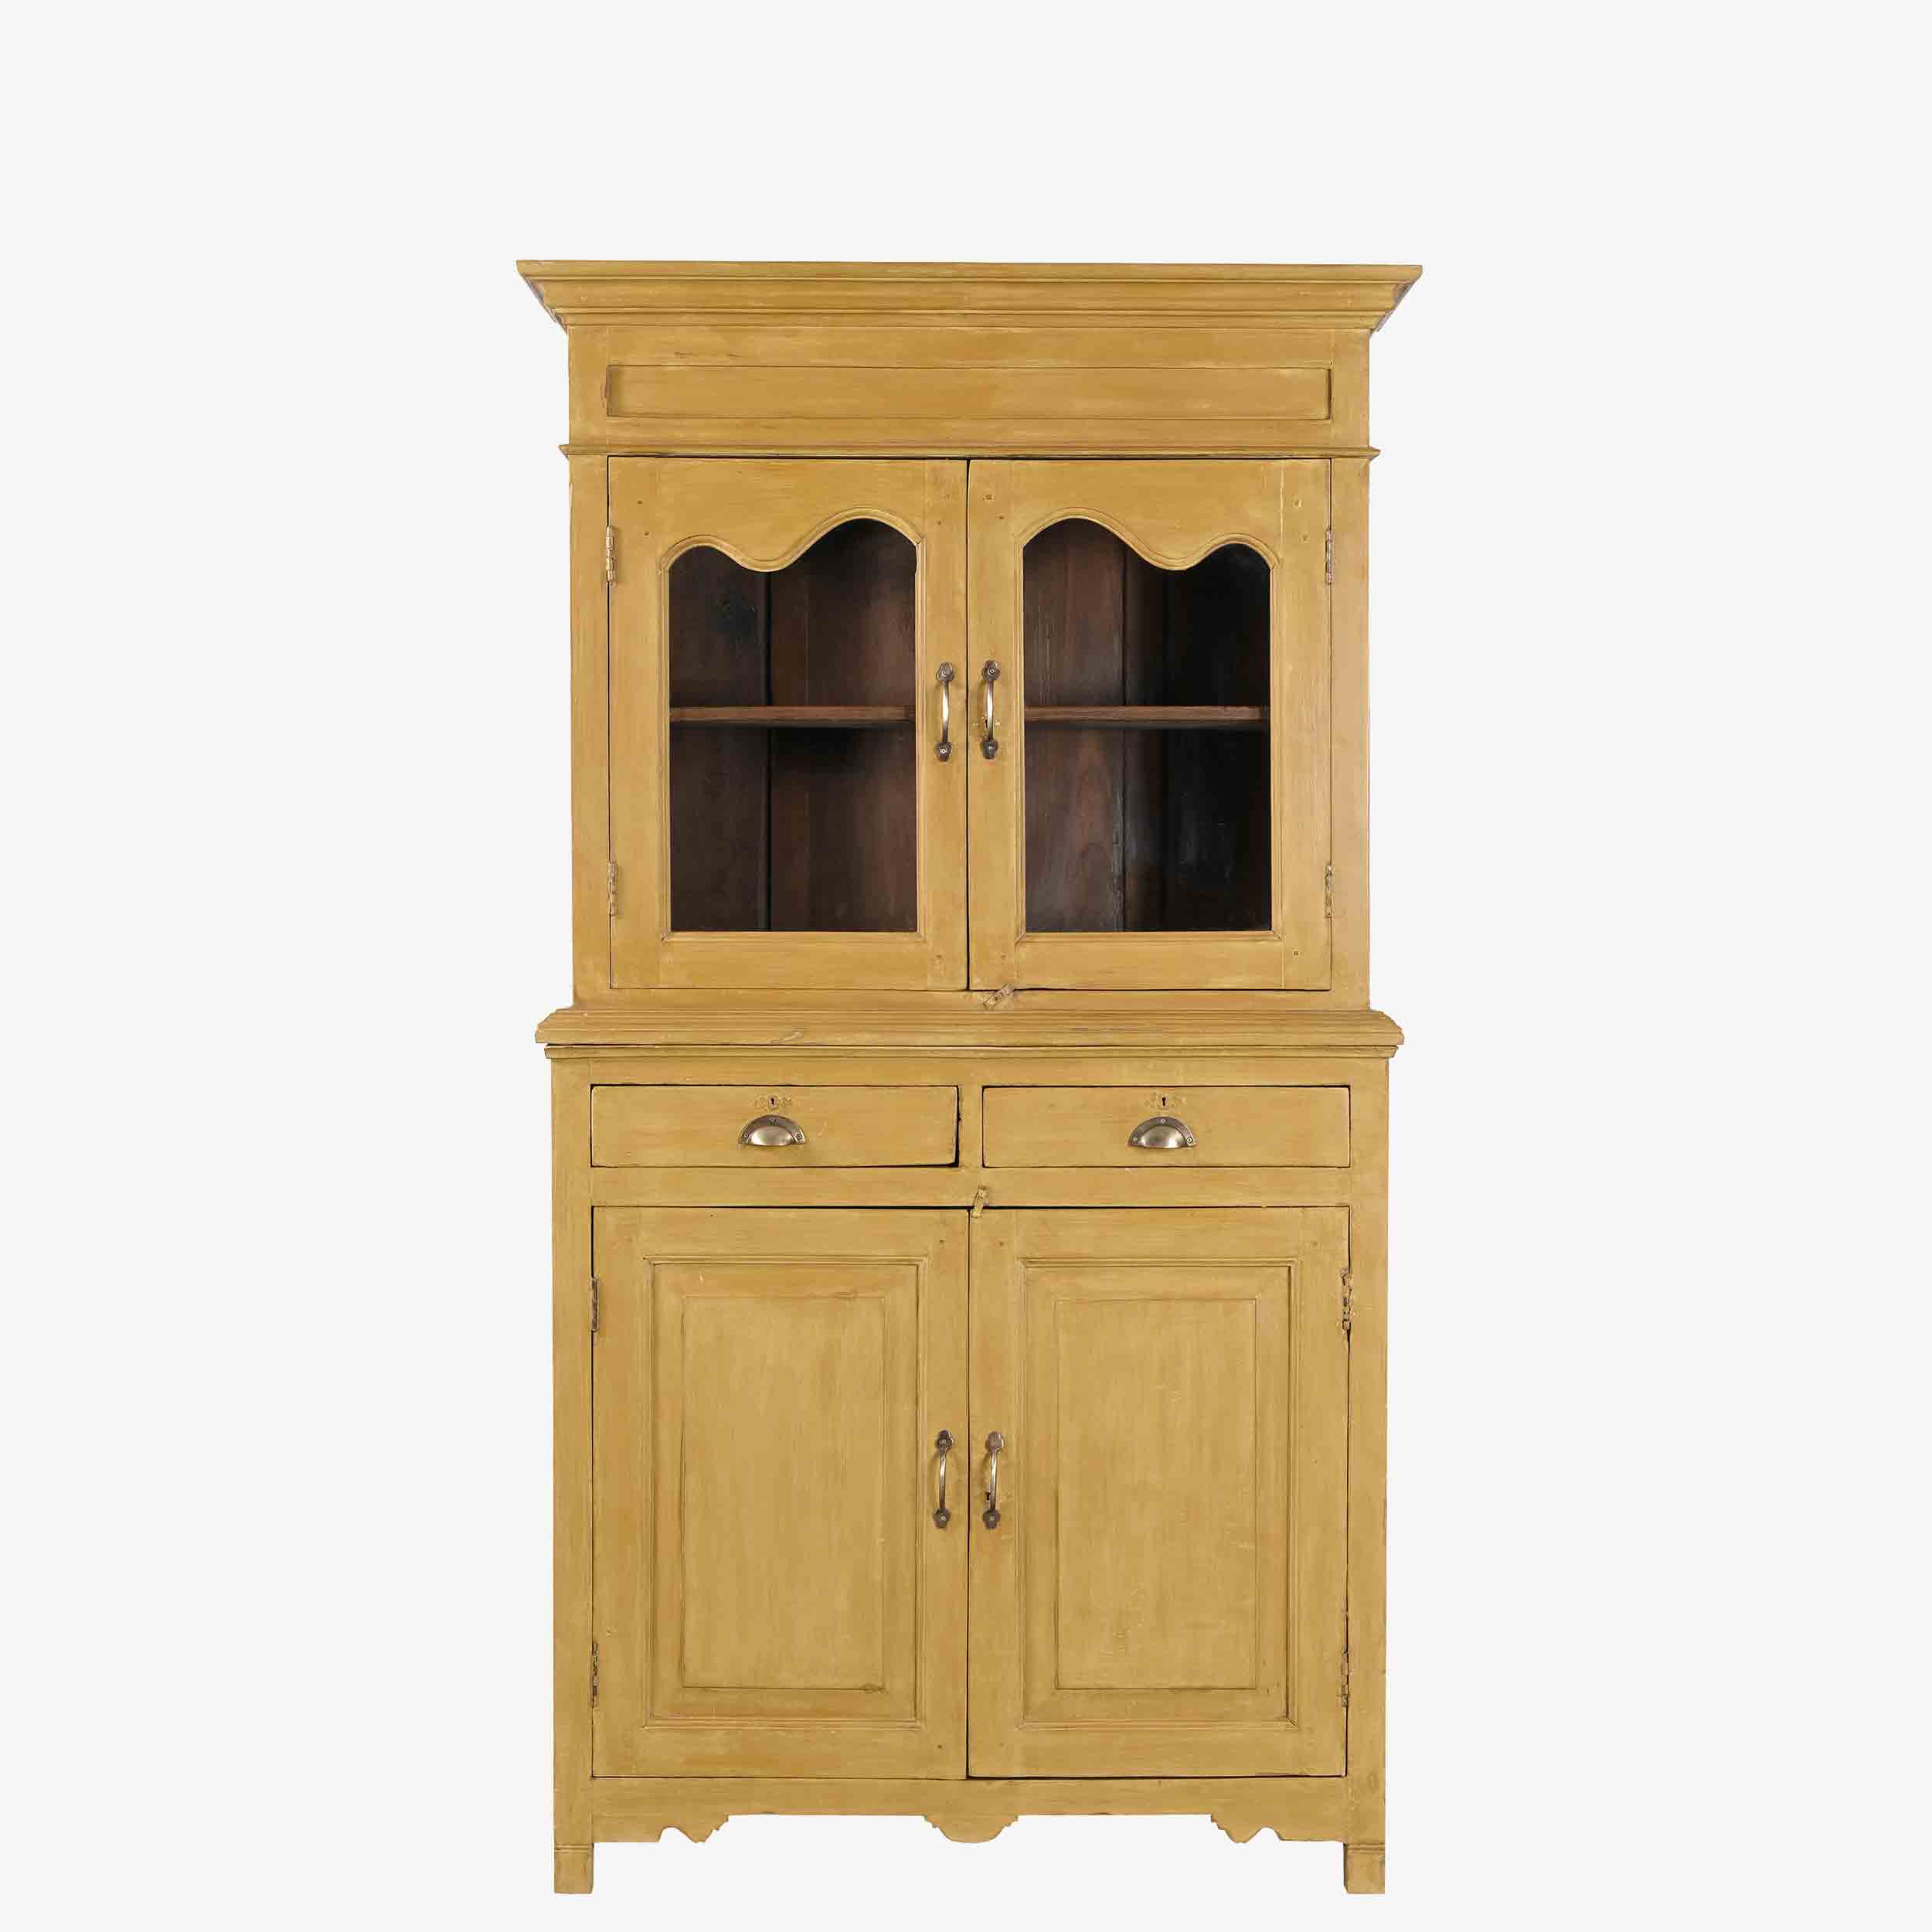 The Amelia Antique Display Dresser in Field of Wheat Yellow